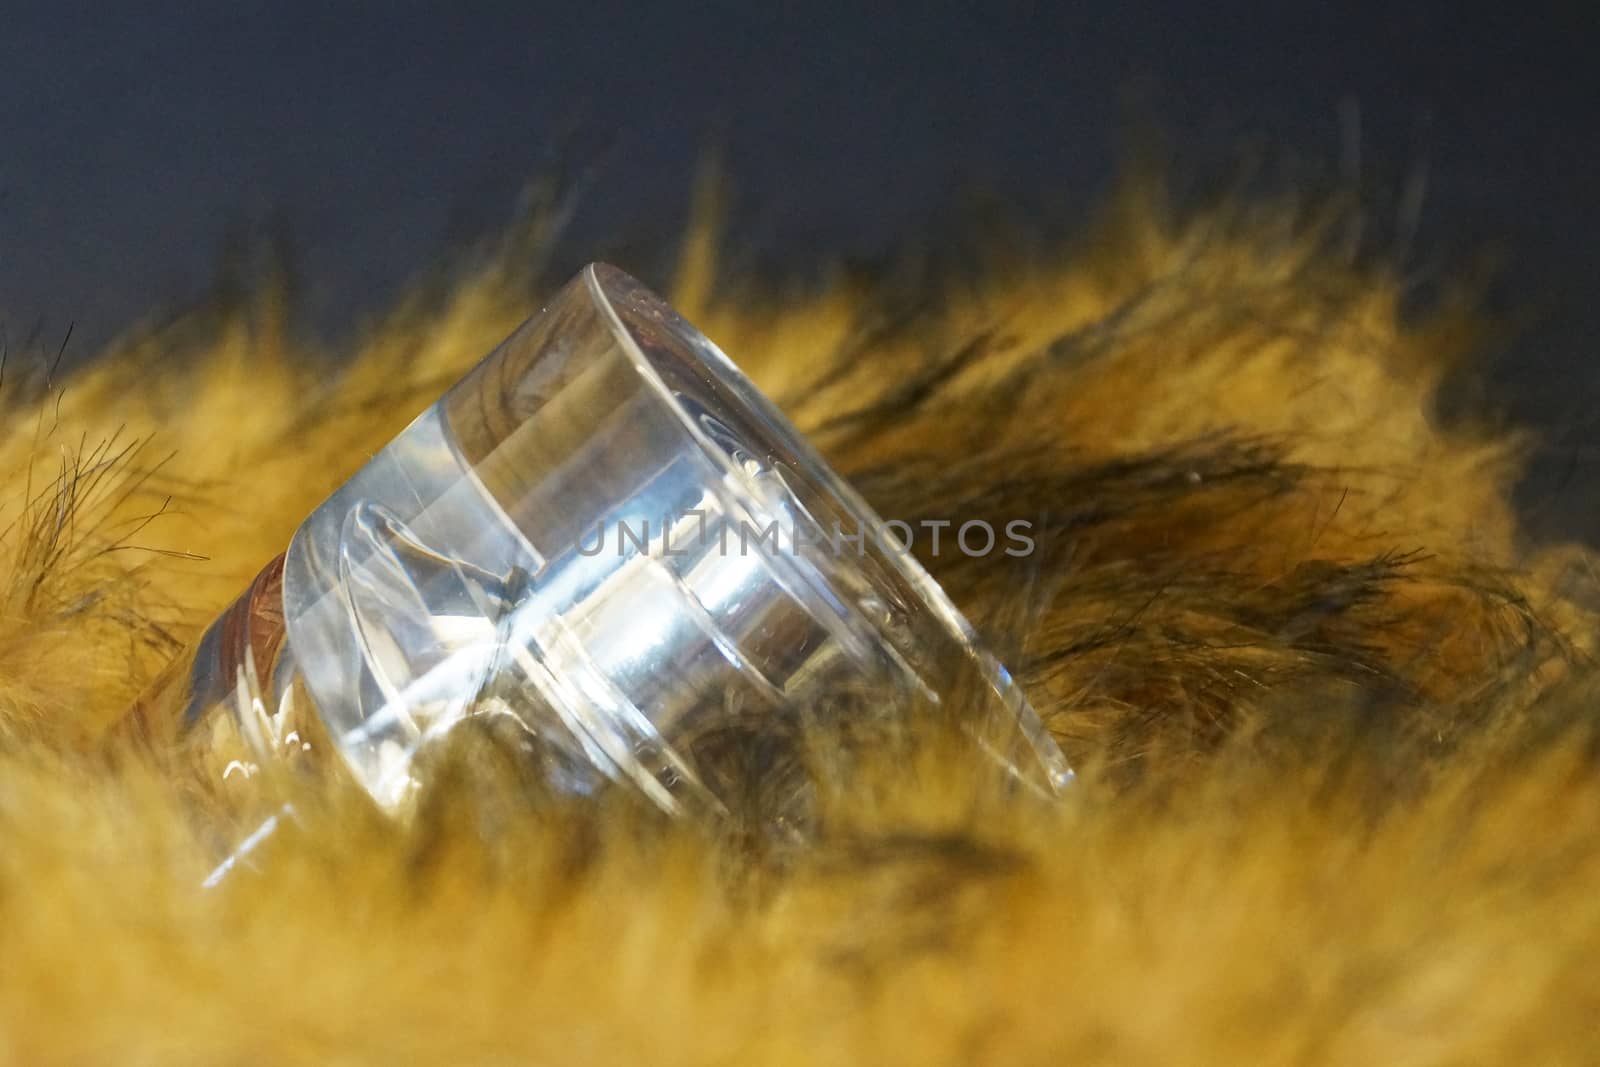 perfume bottle in yellow fur on a black background by Annado